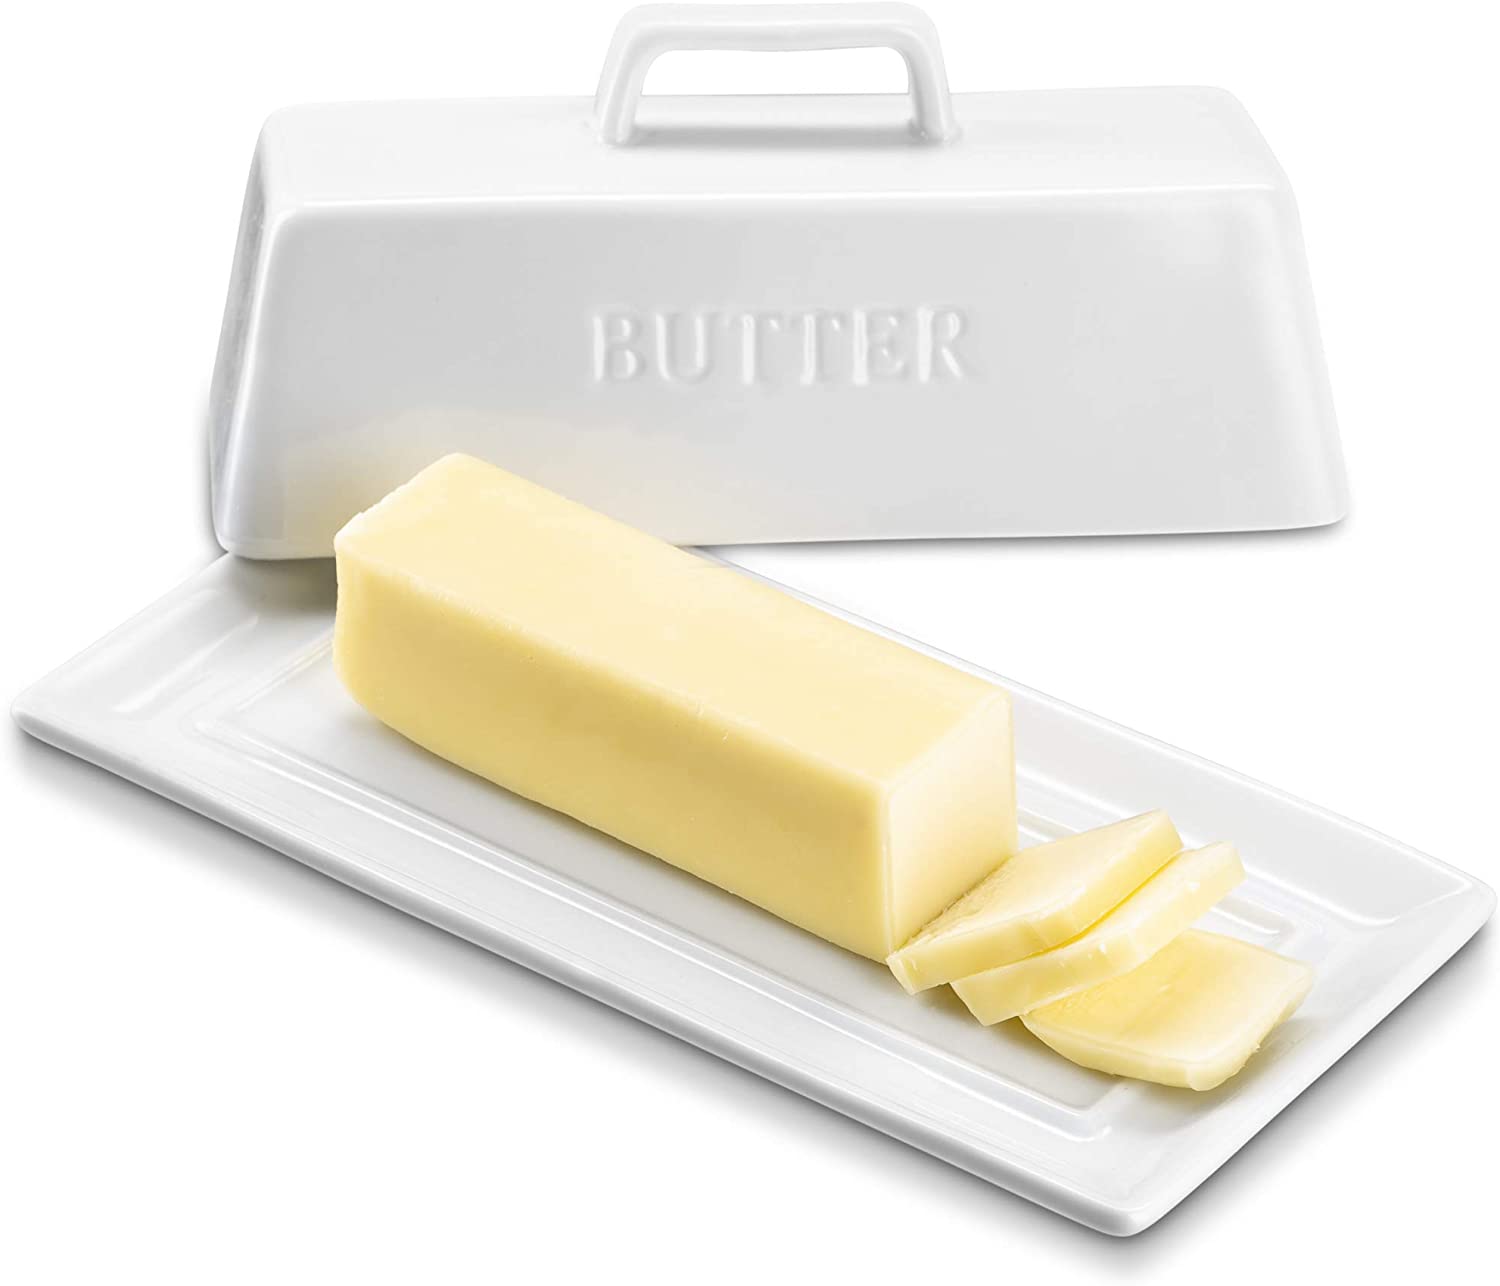 How long does butter last out of the fridge